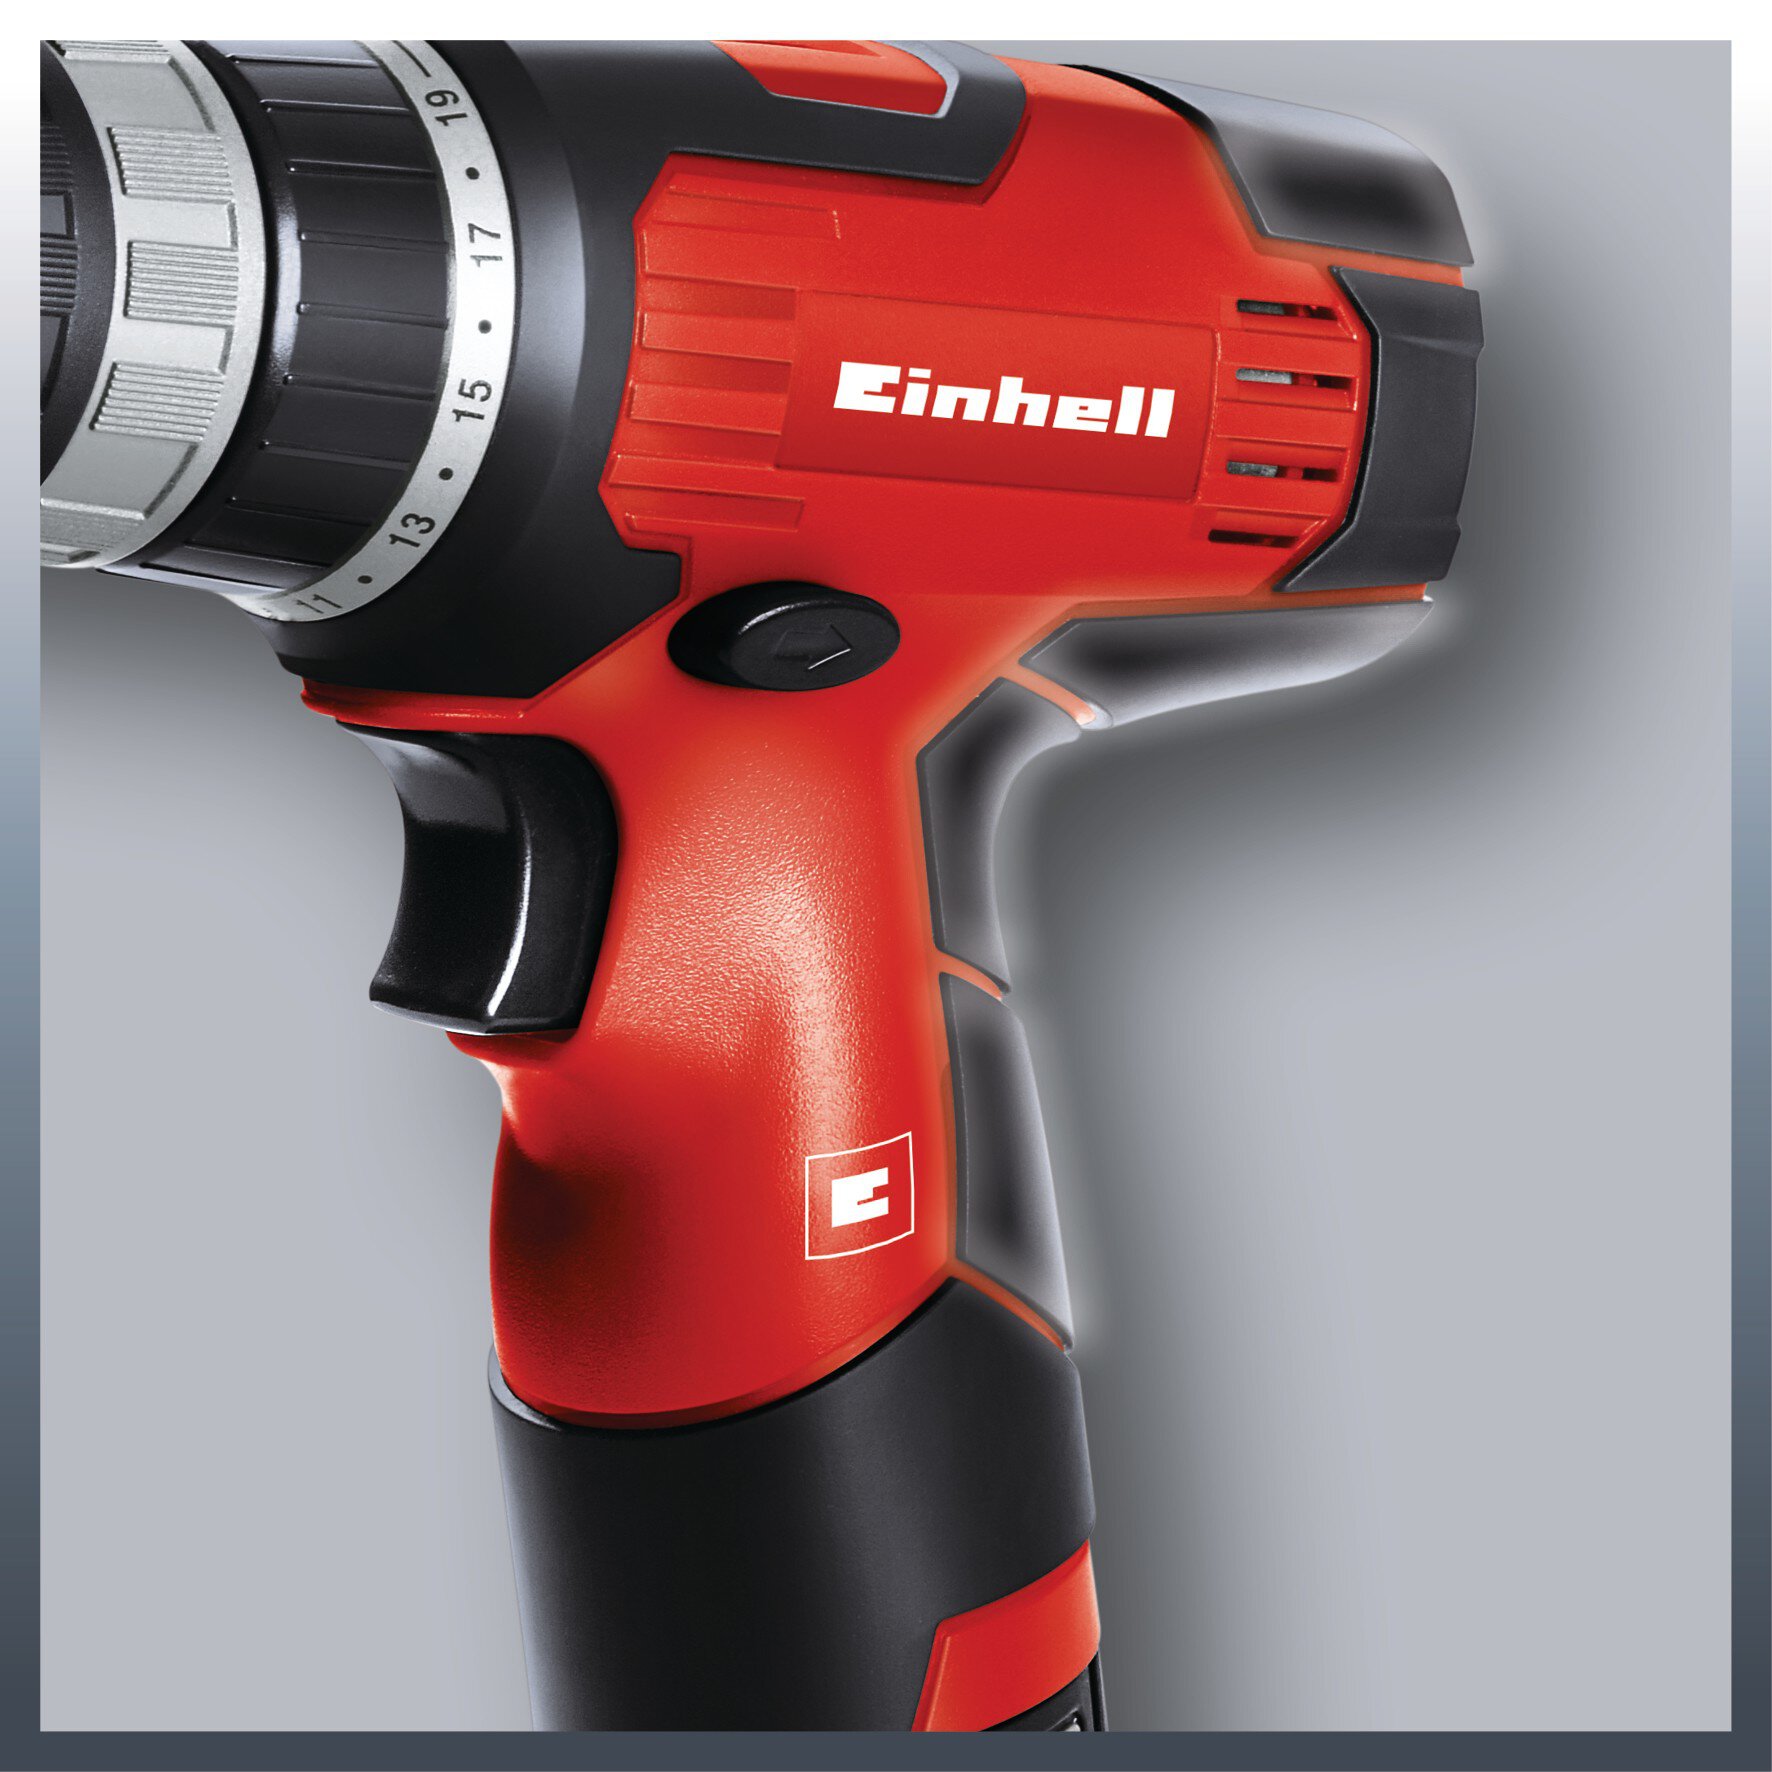 einhell-classic-cordless-drill-4513622-detail_image-001